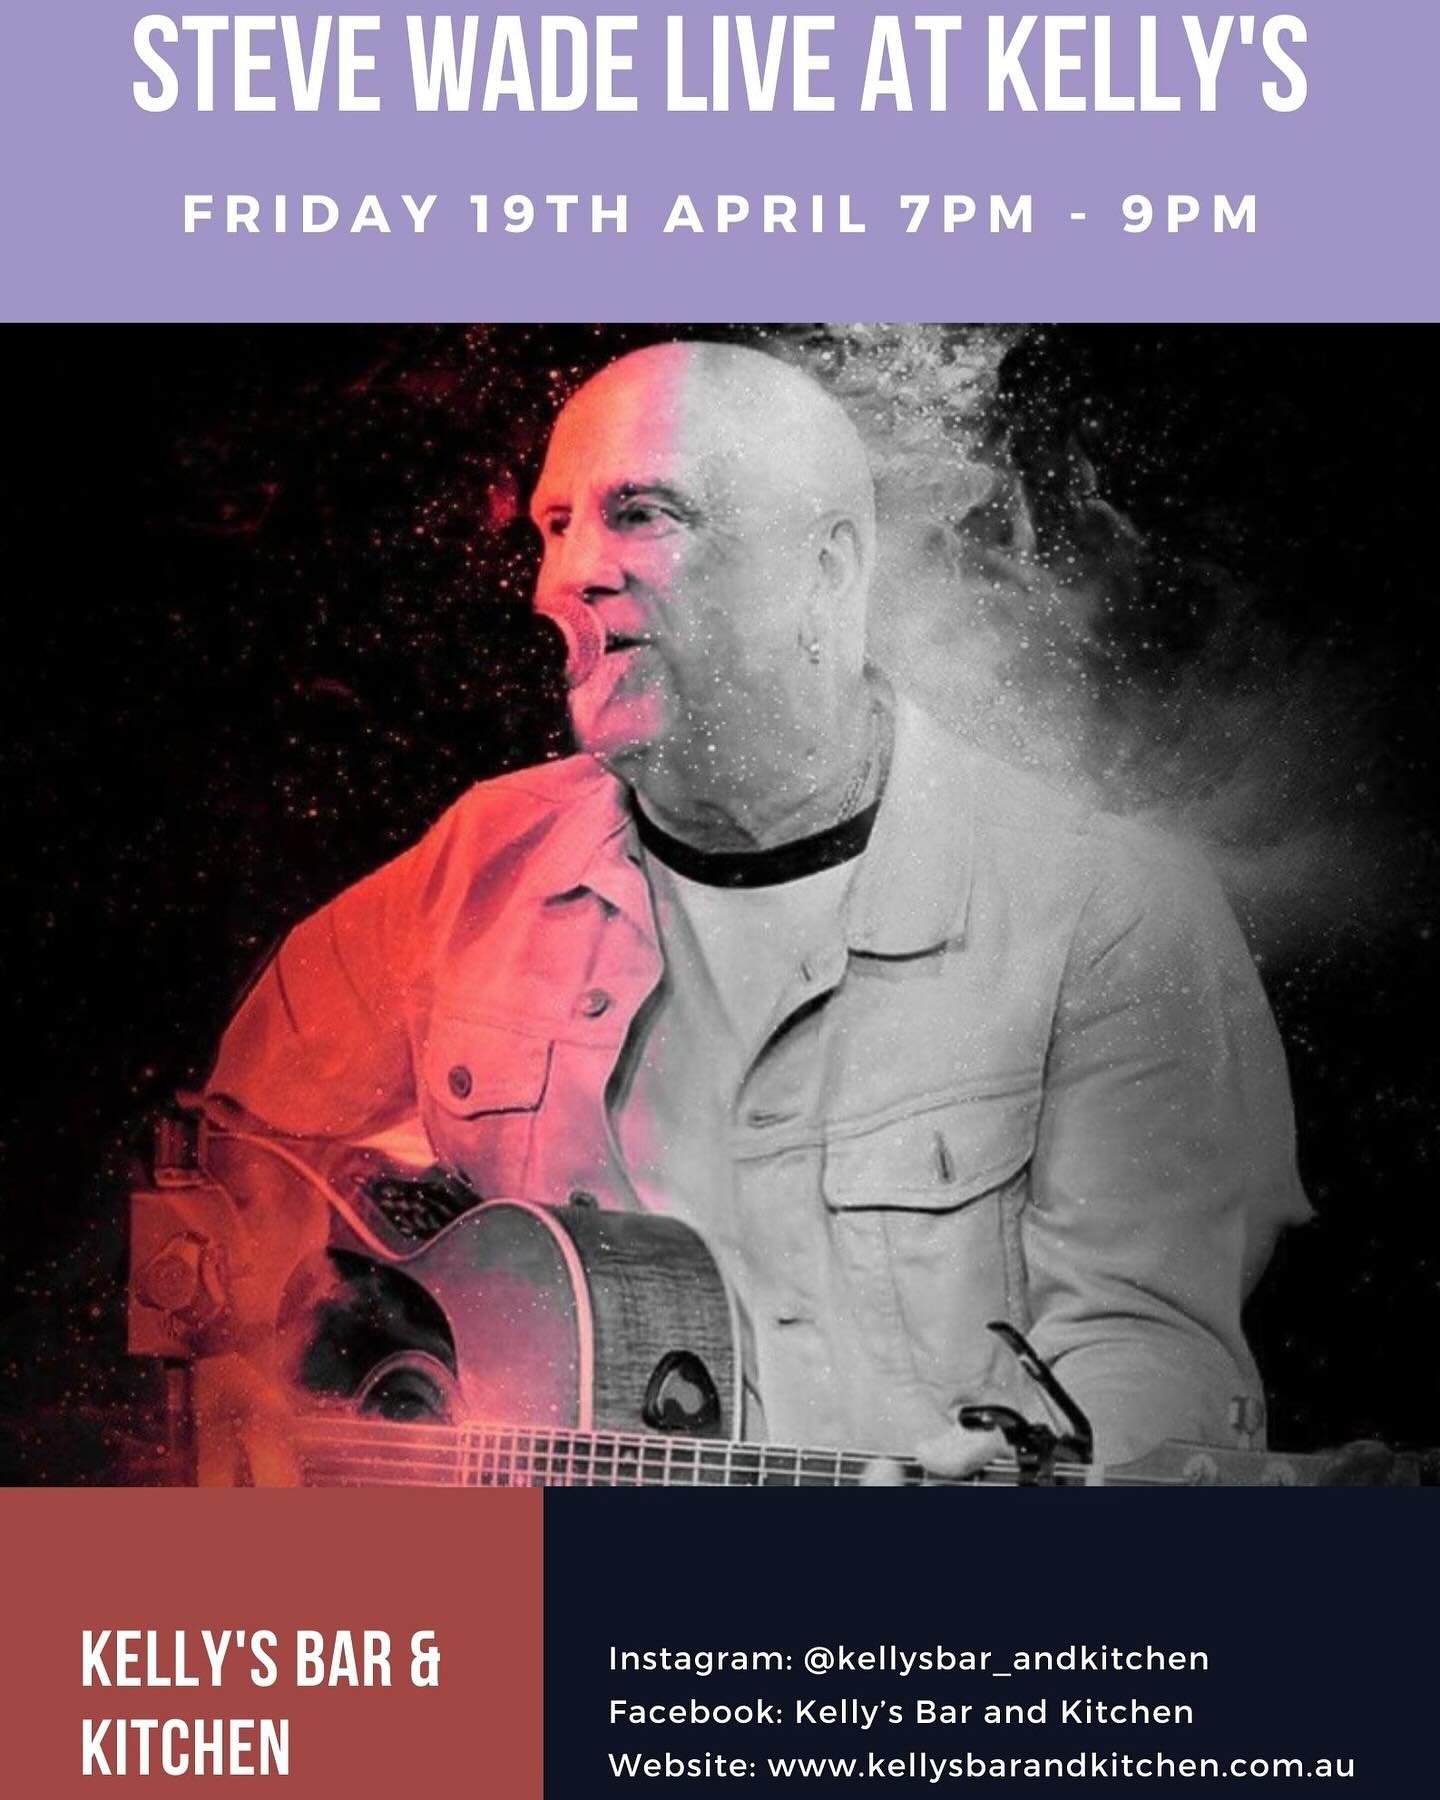 Don&rsquo;t forget to book your table for this Friday 19th April to see the fabulous Steve Wade! 😃

Steve will be playing live from 7pm-9pm.🎤🎸🎵